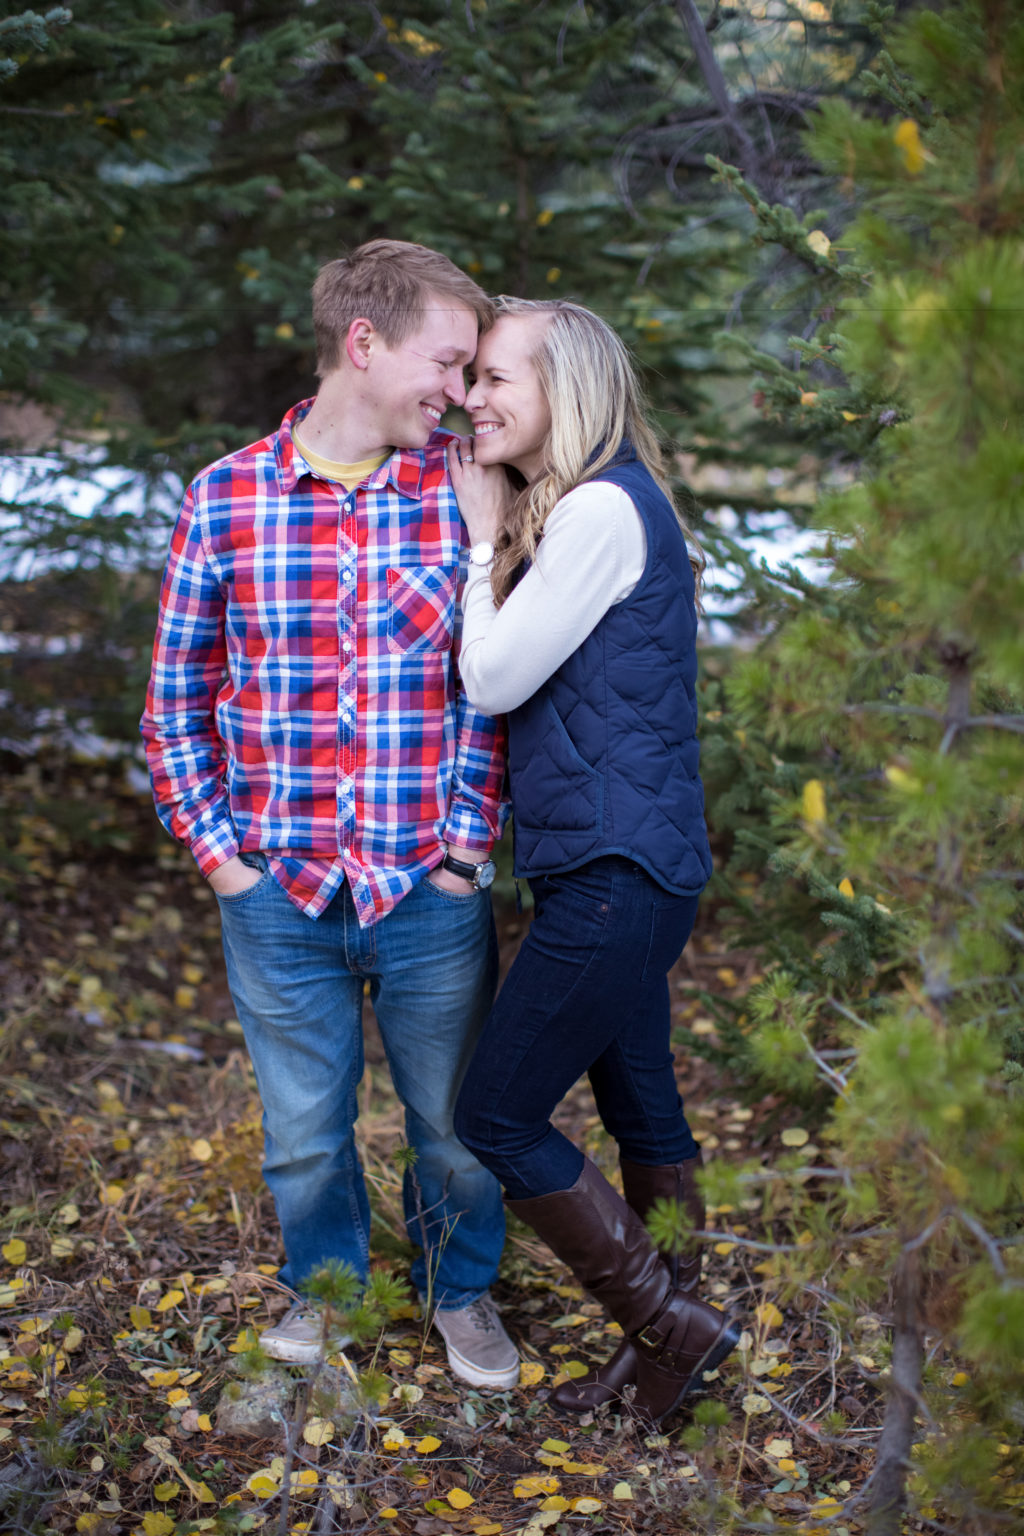 evergreen colorado engagement session sweet couples snuggles up and gets cuddly in plaid and vest